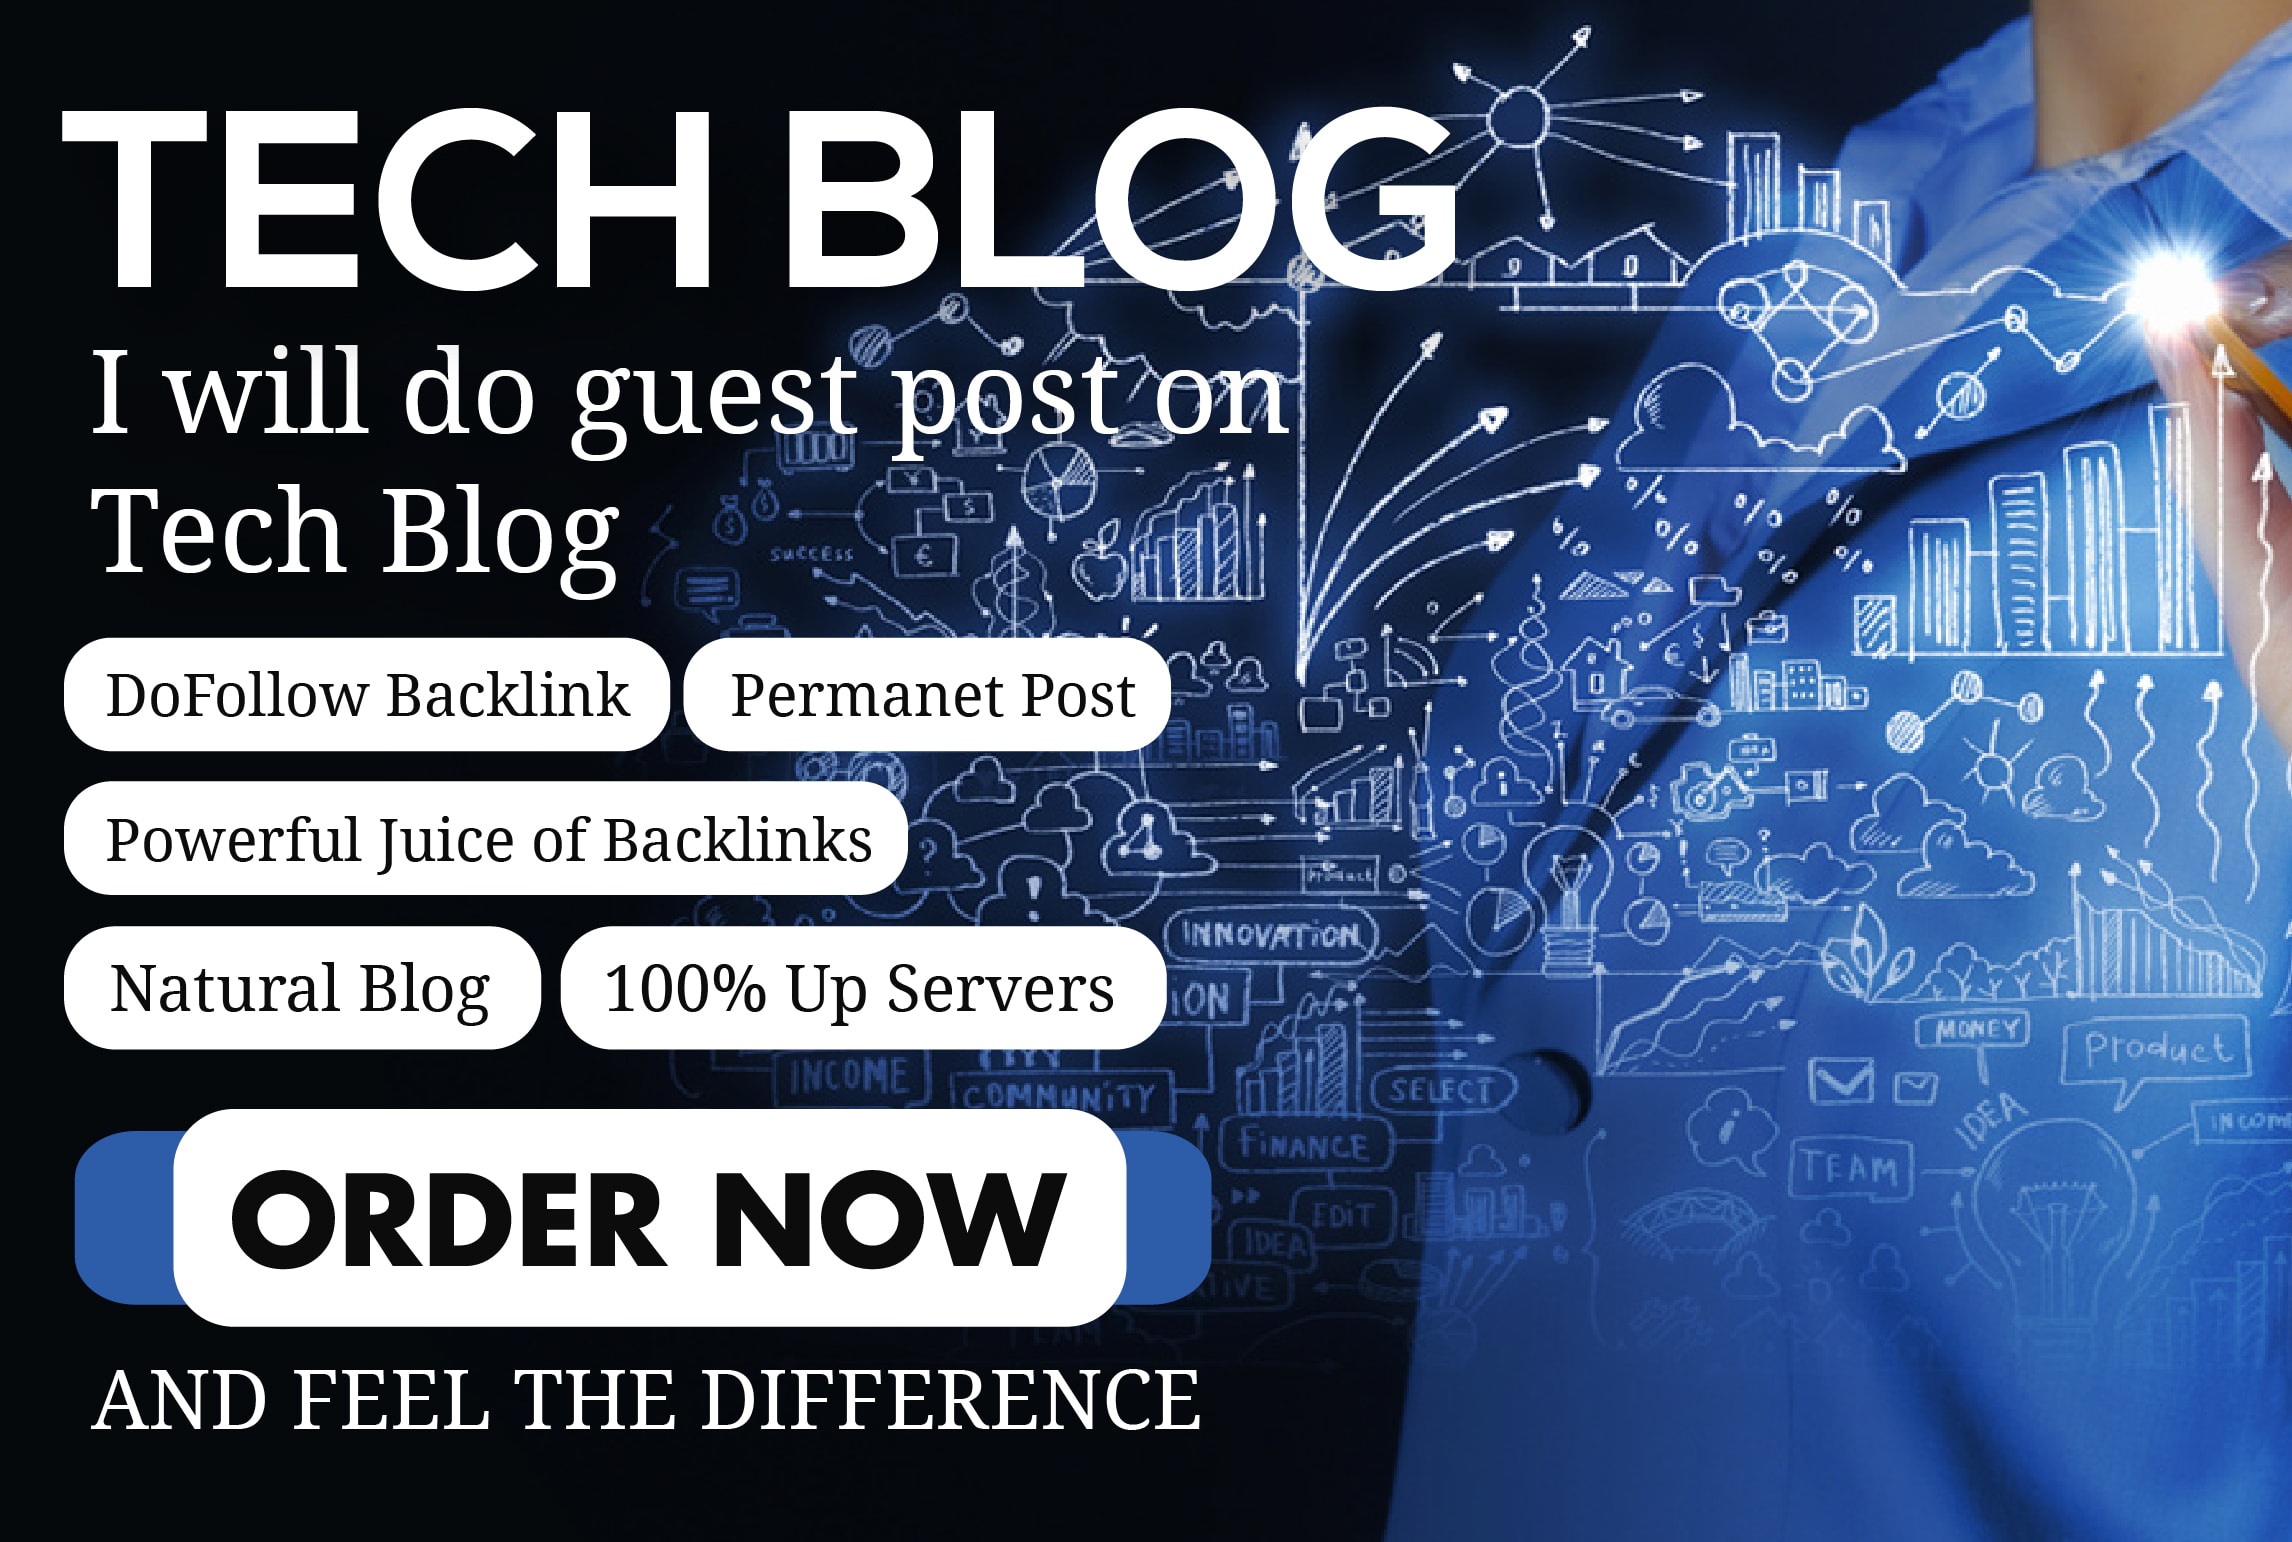 What are the best practices for maximizing the benefits of a Tech Guest Posting Service?